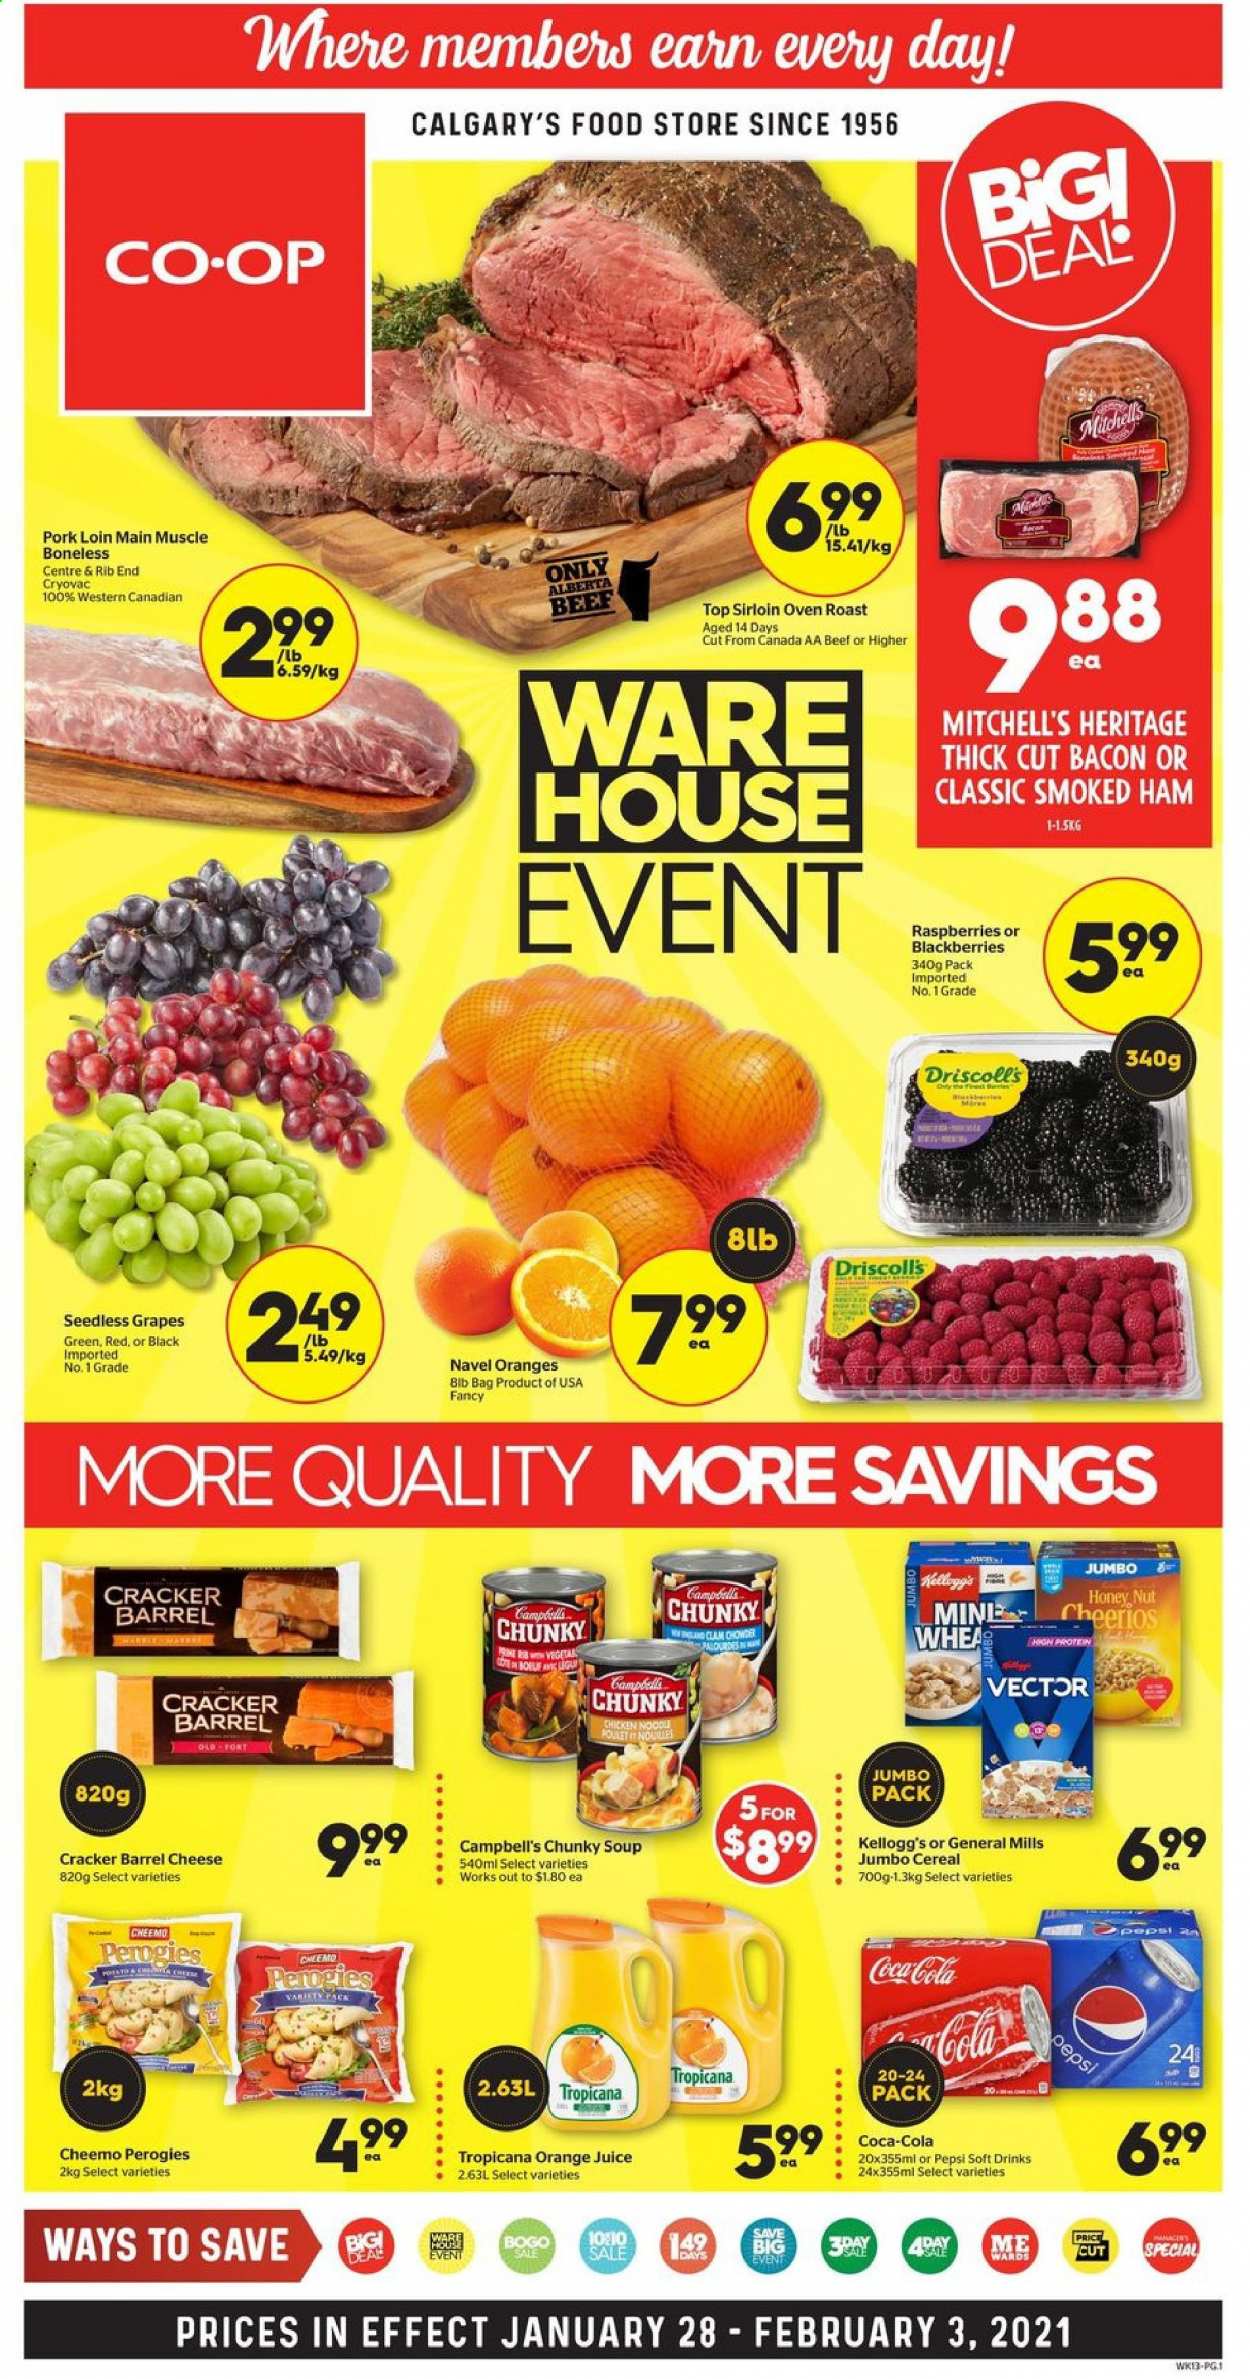 thumbnail - Calgary Co-op Flyer - January 28, 2021 - February 03, 2021 - Sales products - blackberries, grapes, seedless grapes, navel oranges, Campbell's, soup, bacon, ham, smoked ham, cheese, crackers, Kellogg's, cereals, Cheerios, Coca-Cola, Pepsi, orange juice, juice, soft drink, pork loin, pork meat, bag. Page 1.